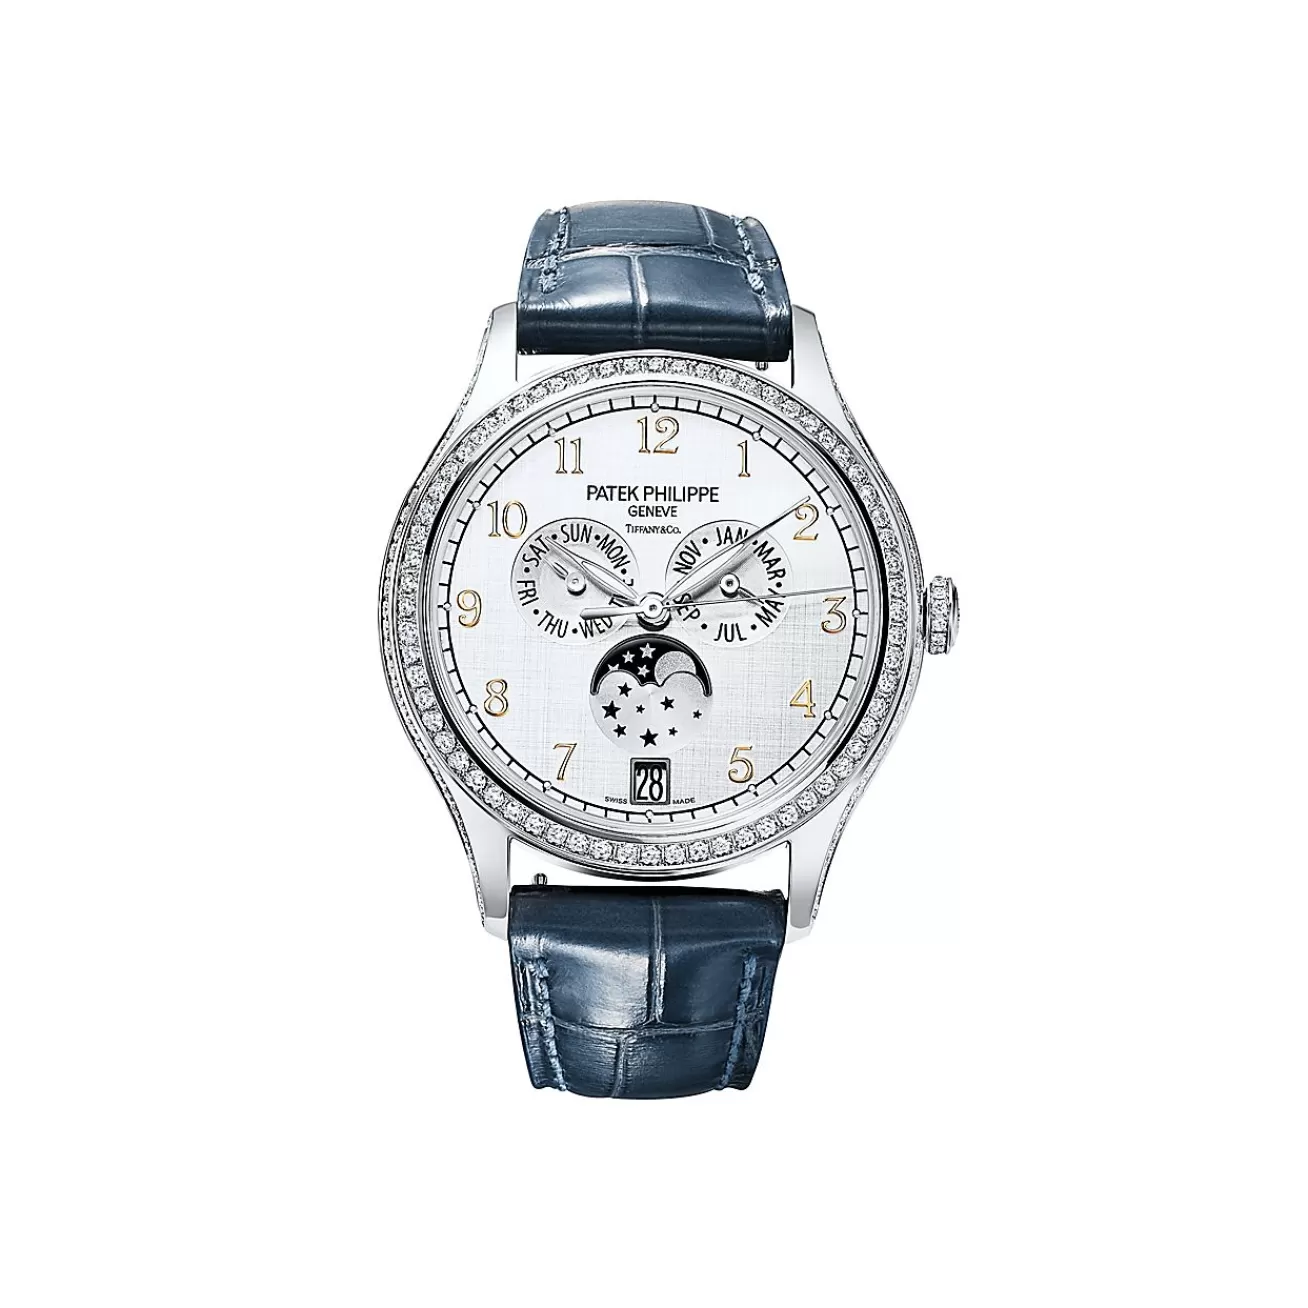 Tiffany & Co. Patek Philippe Complications women's watch in 18k white gold with diamonds. | ^ Patek Philippe